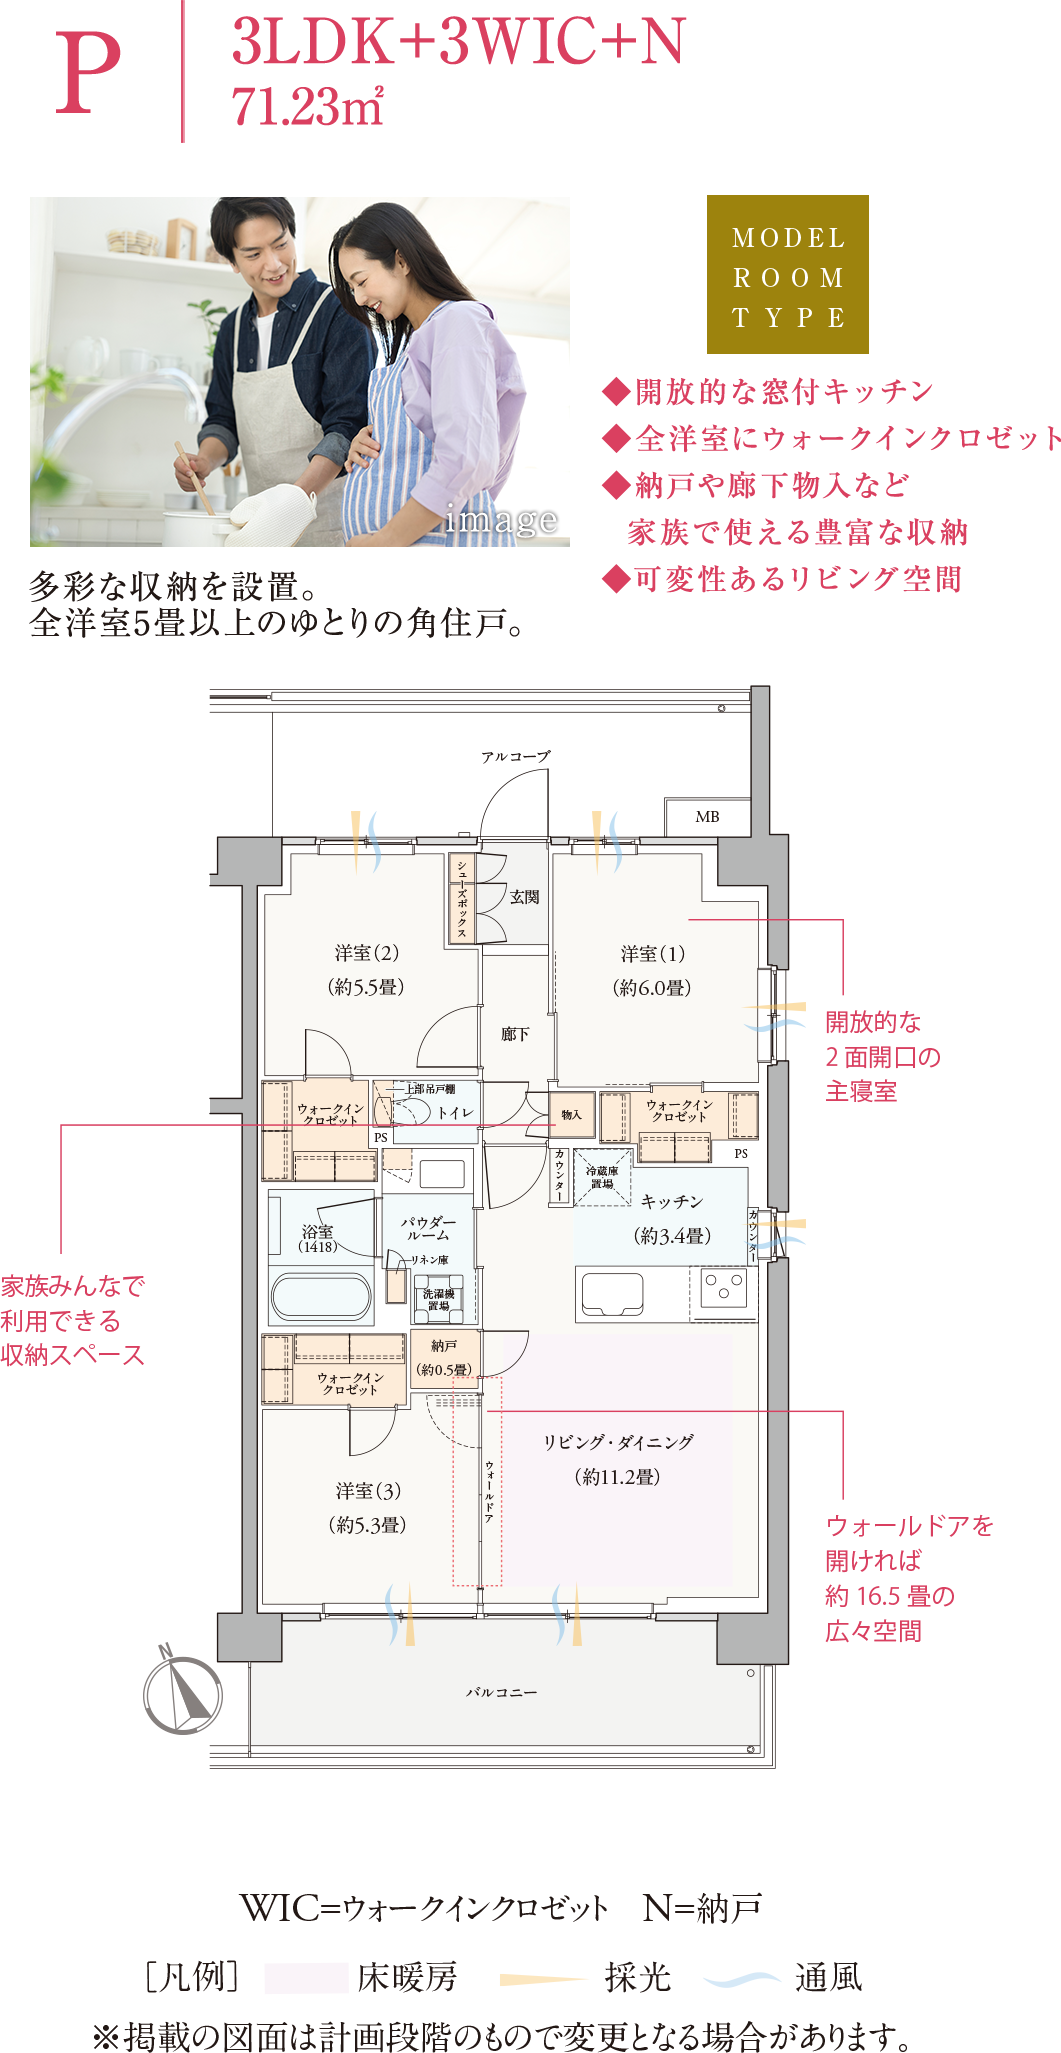 3LDK+3WIC+N 多彩な収納を設置。全洋室5畳以上のゆとりの角住戸